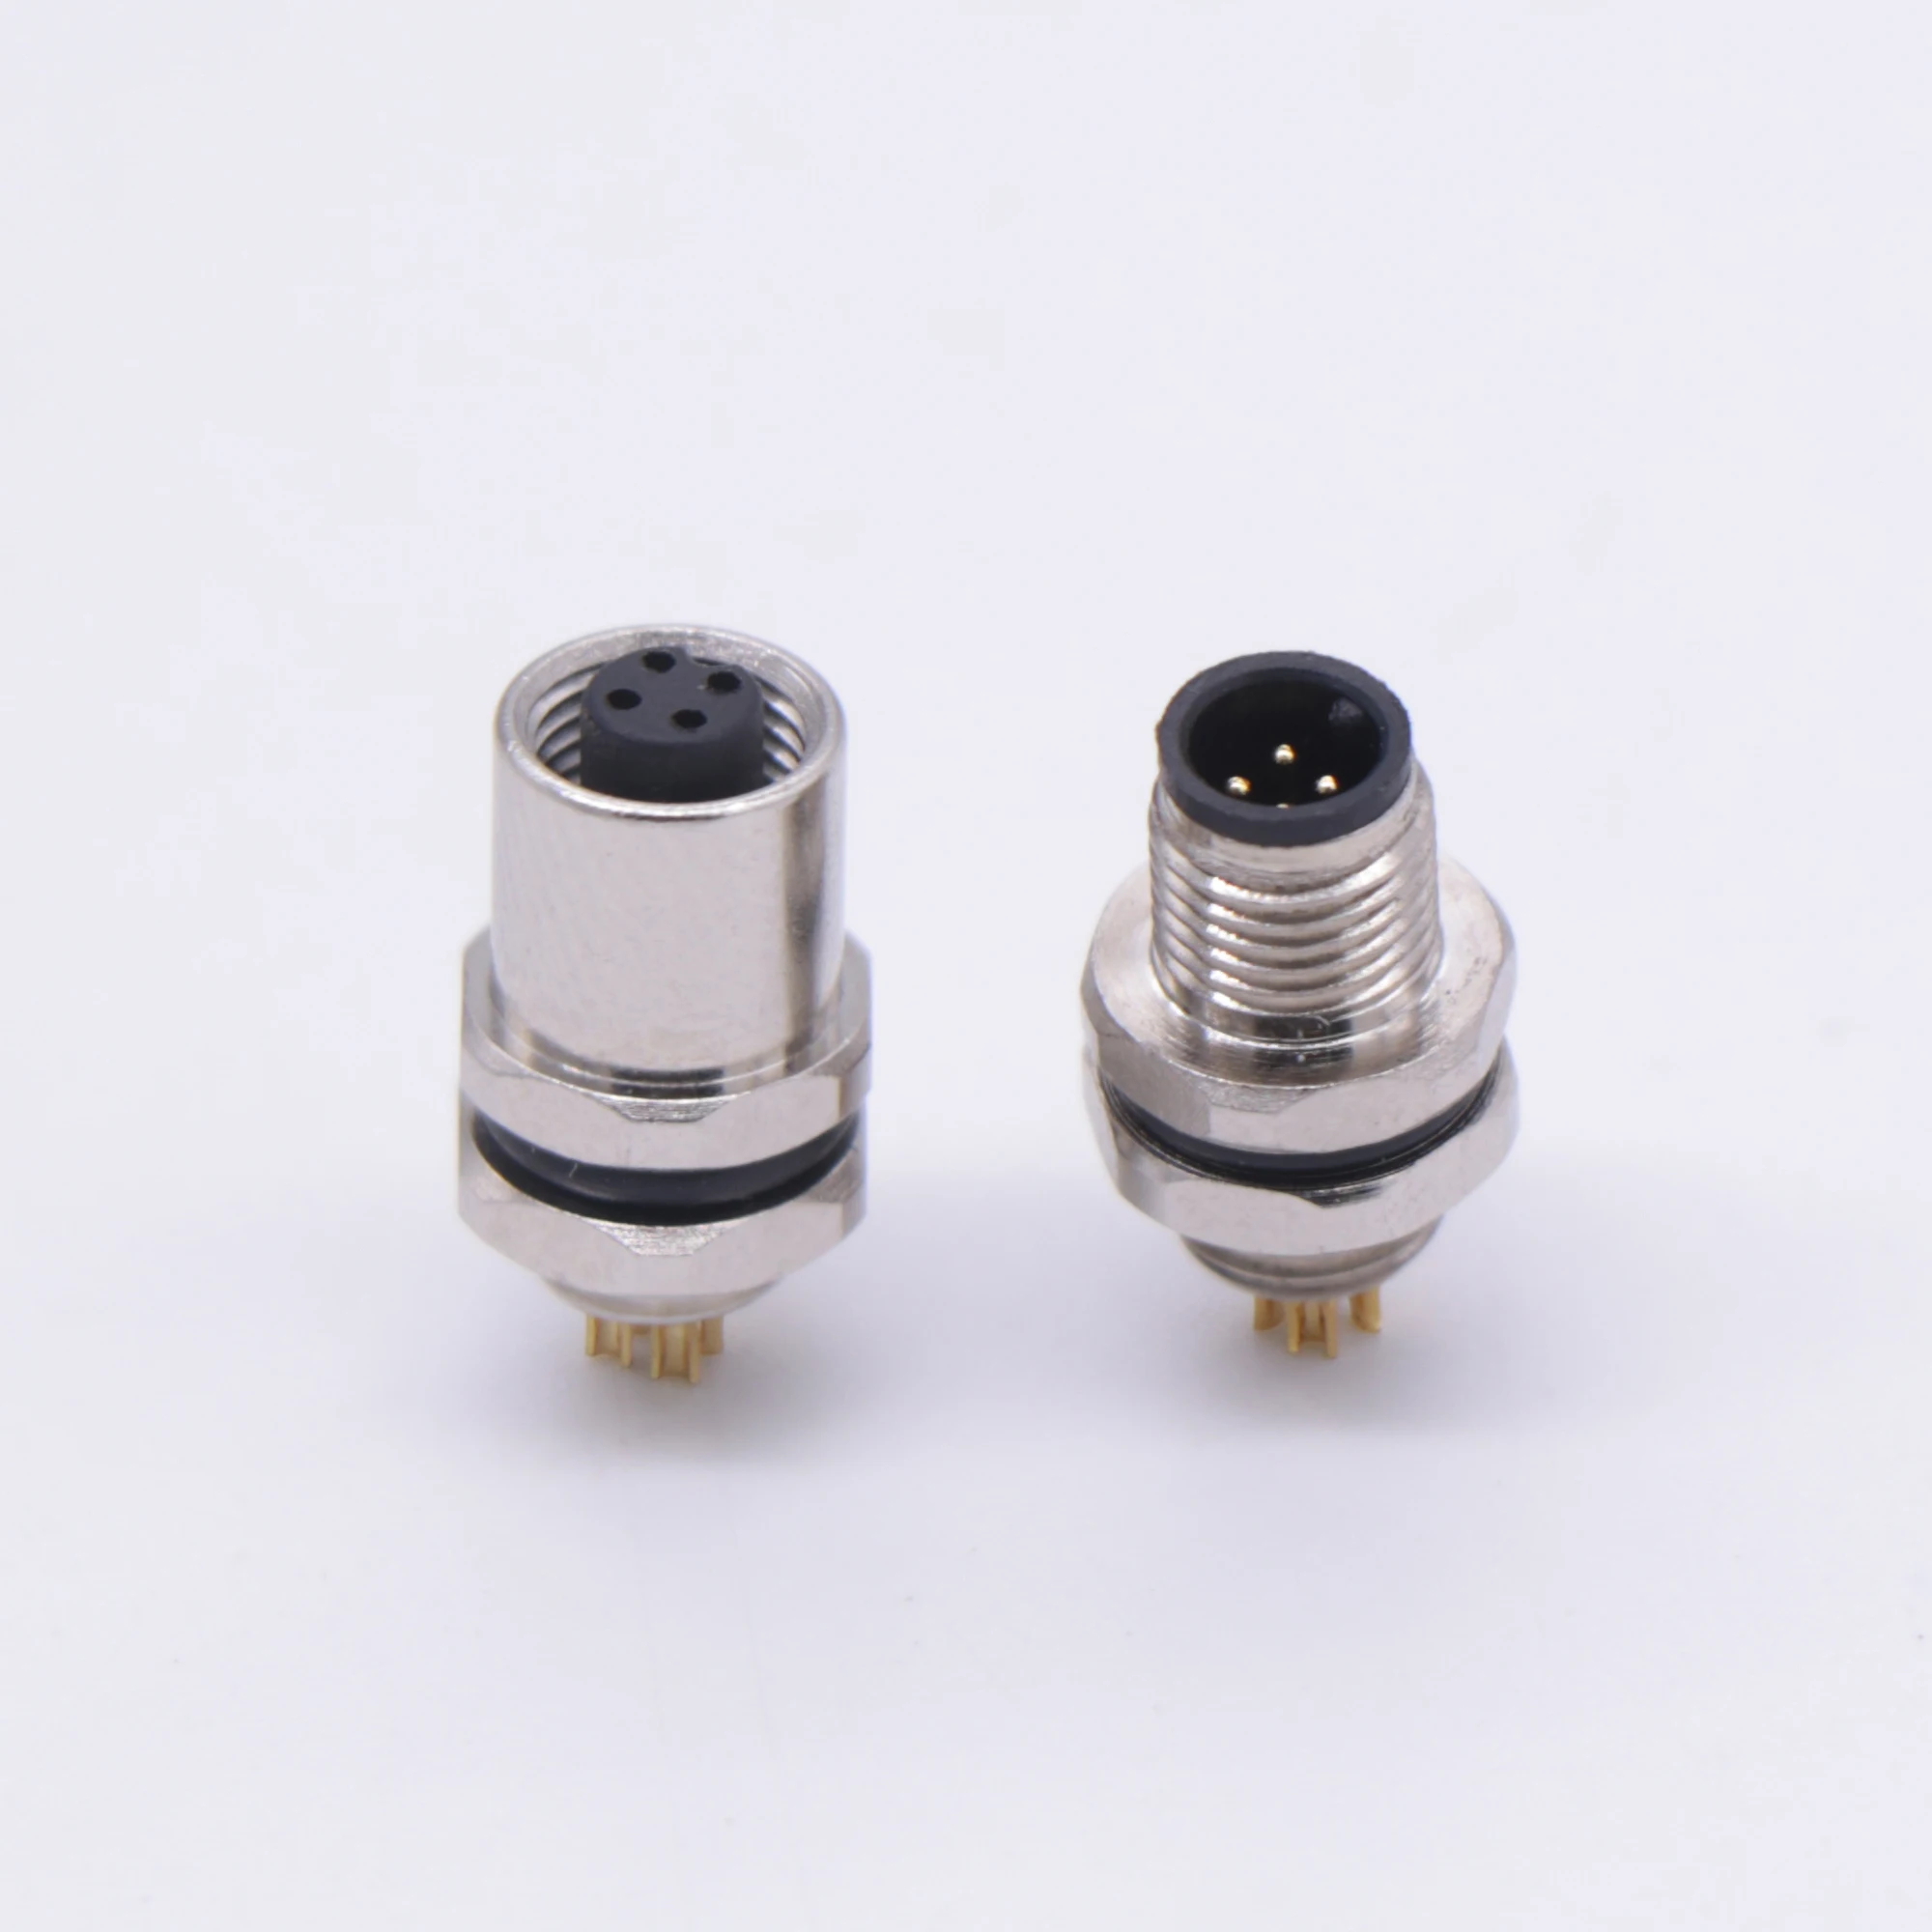 

Ip68 Industrial M5 M8 M9 M16 M23 7/8 2 3 4 5 6 7 8 9 10 12 13 14 16 Pin 3Pin Cable Wire Circular Waterproof M12 Connector